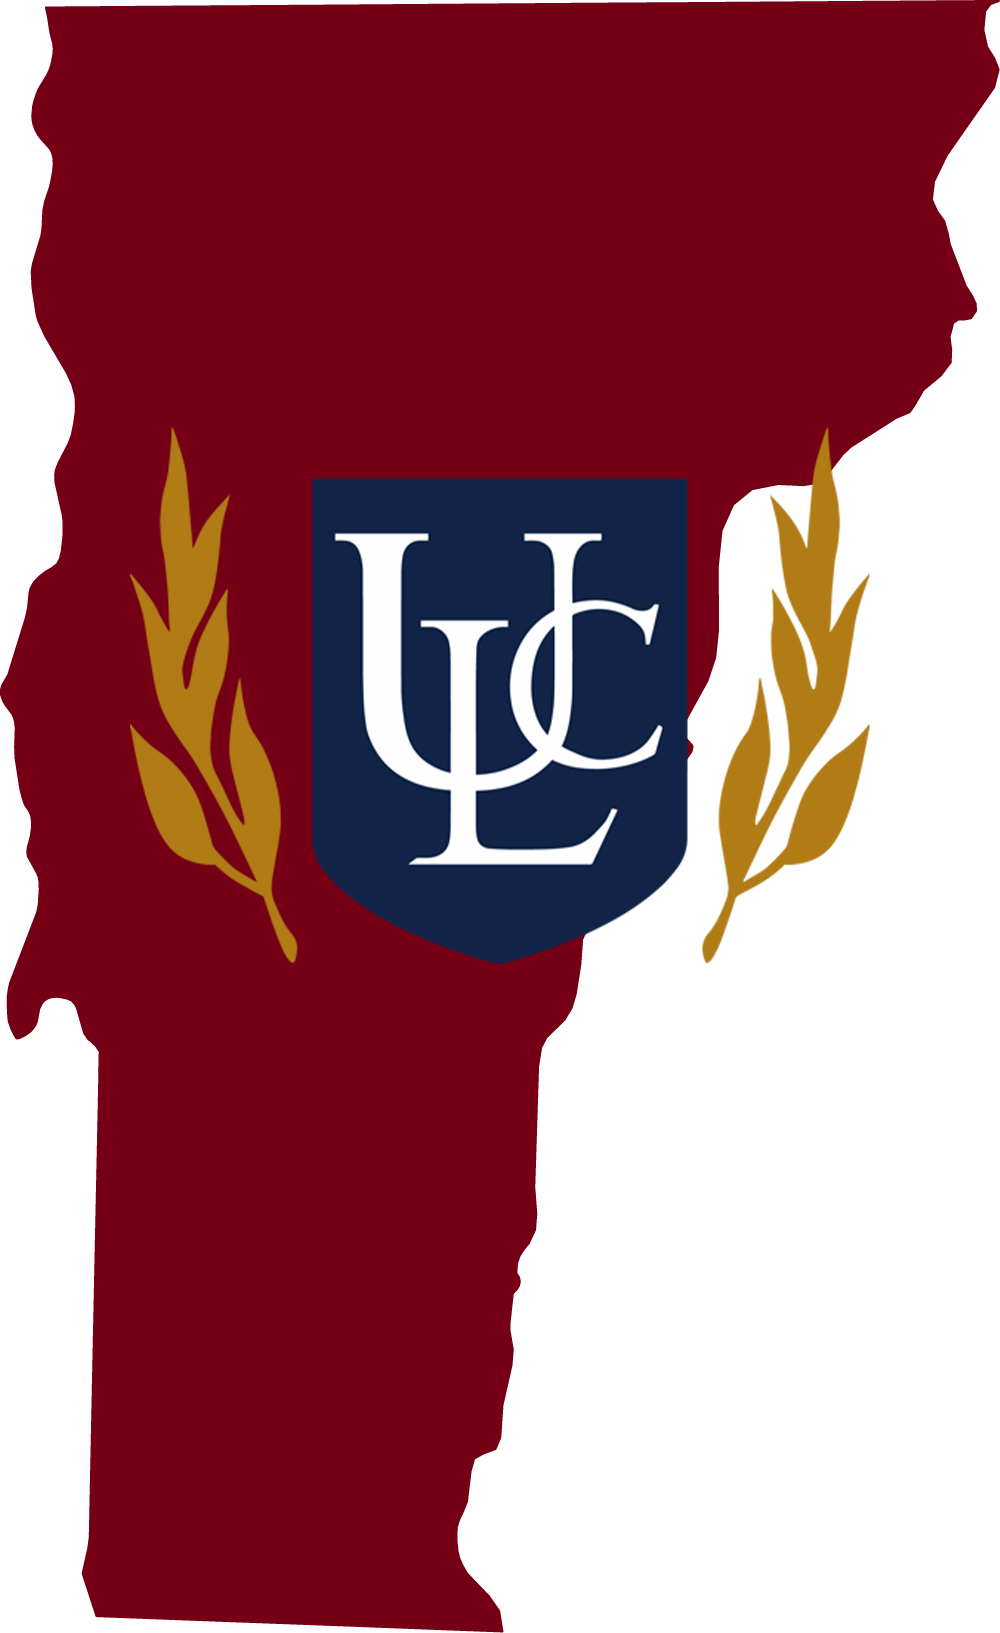 An outline of Vermont with the ULC logo